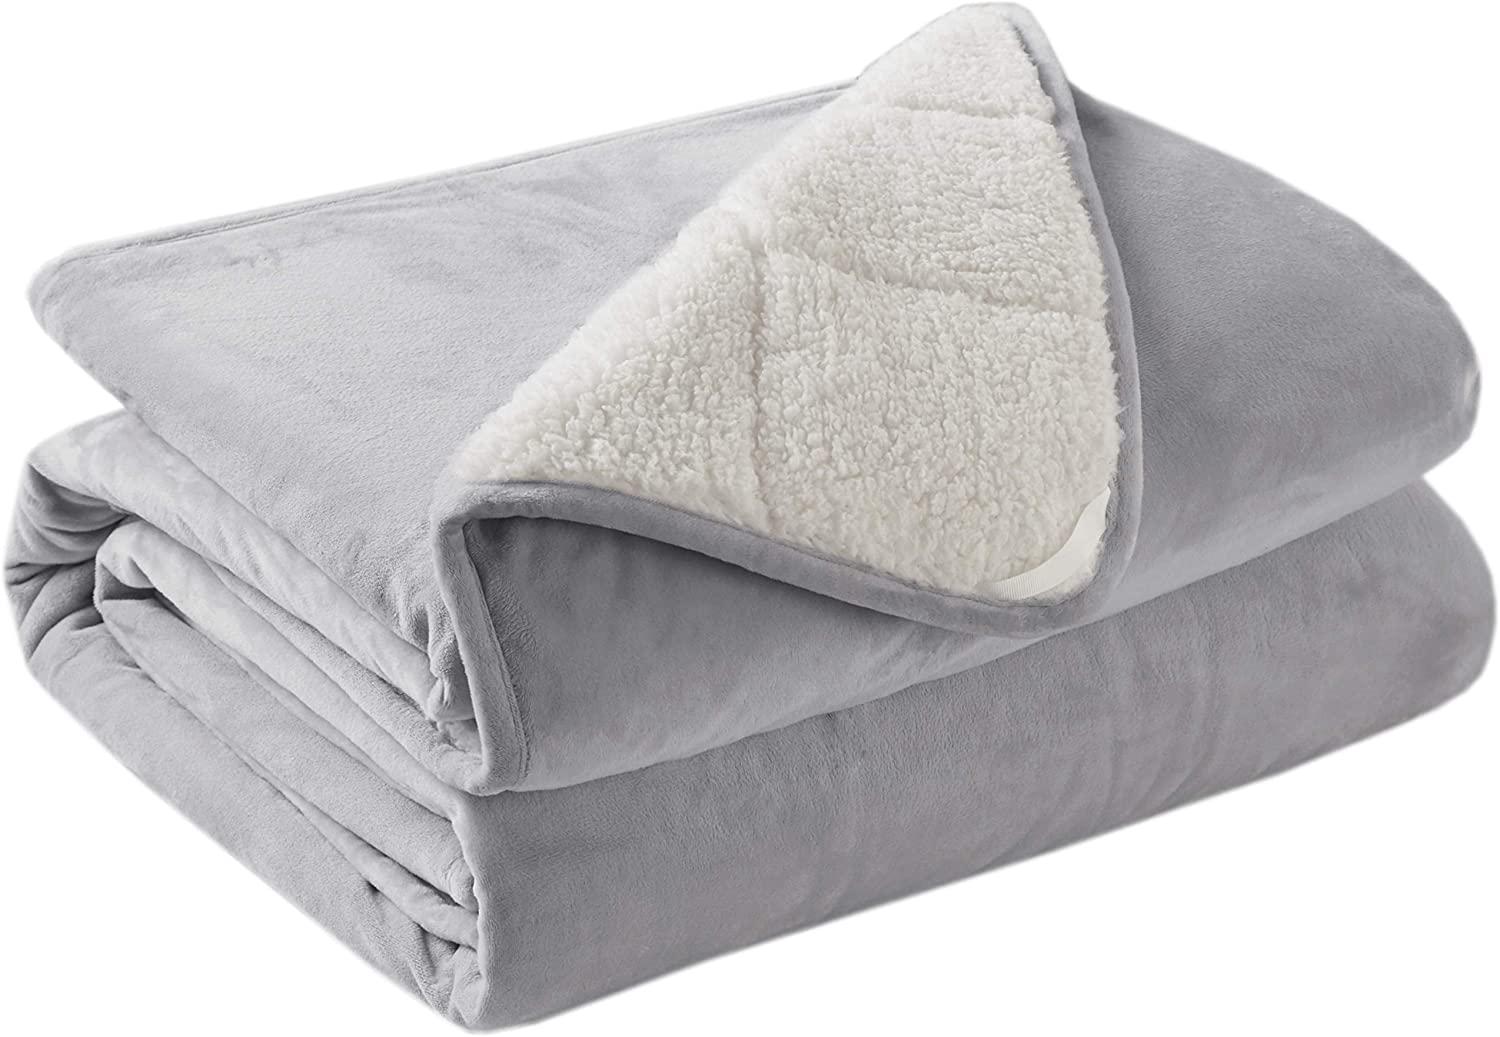 Weighted Baby Blanket Recall